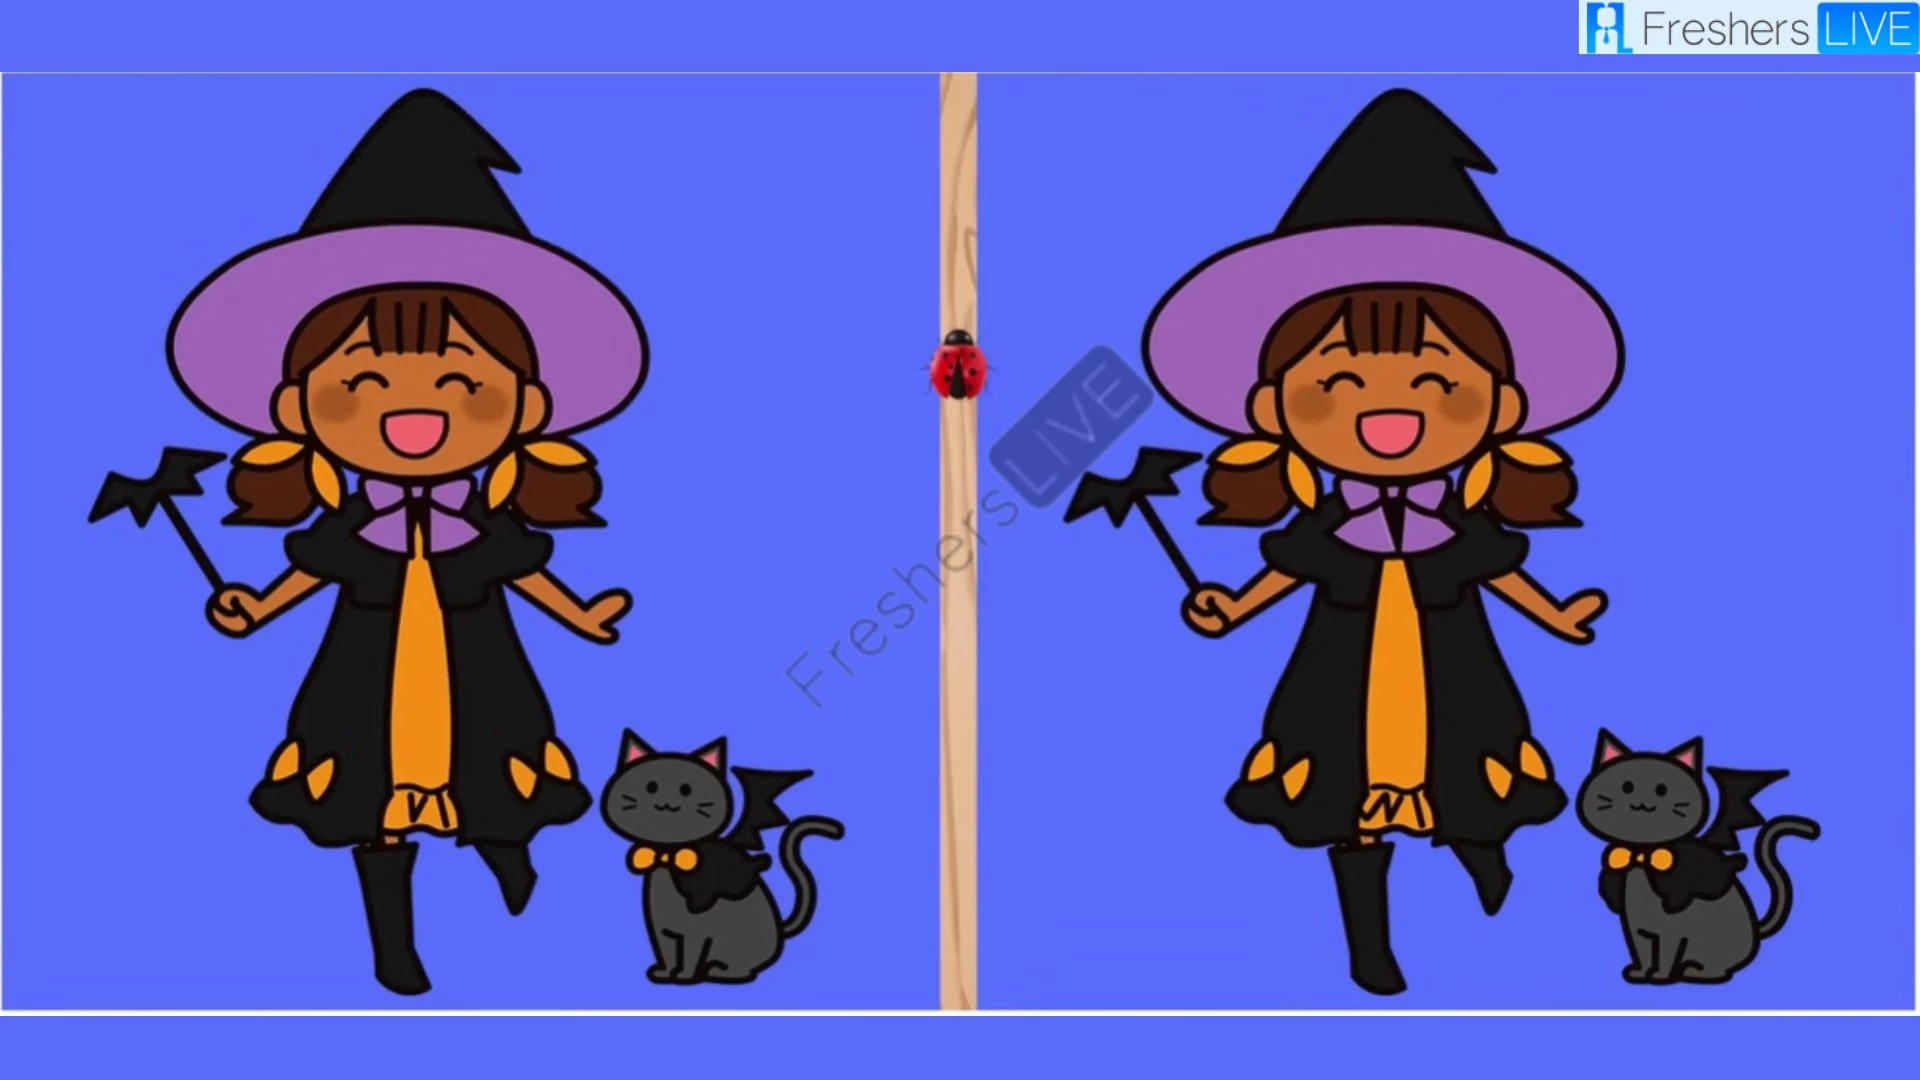 Can you quickly identify 3 differences in the Witch Girl pictures?